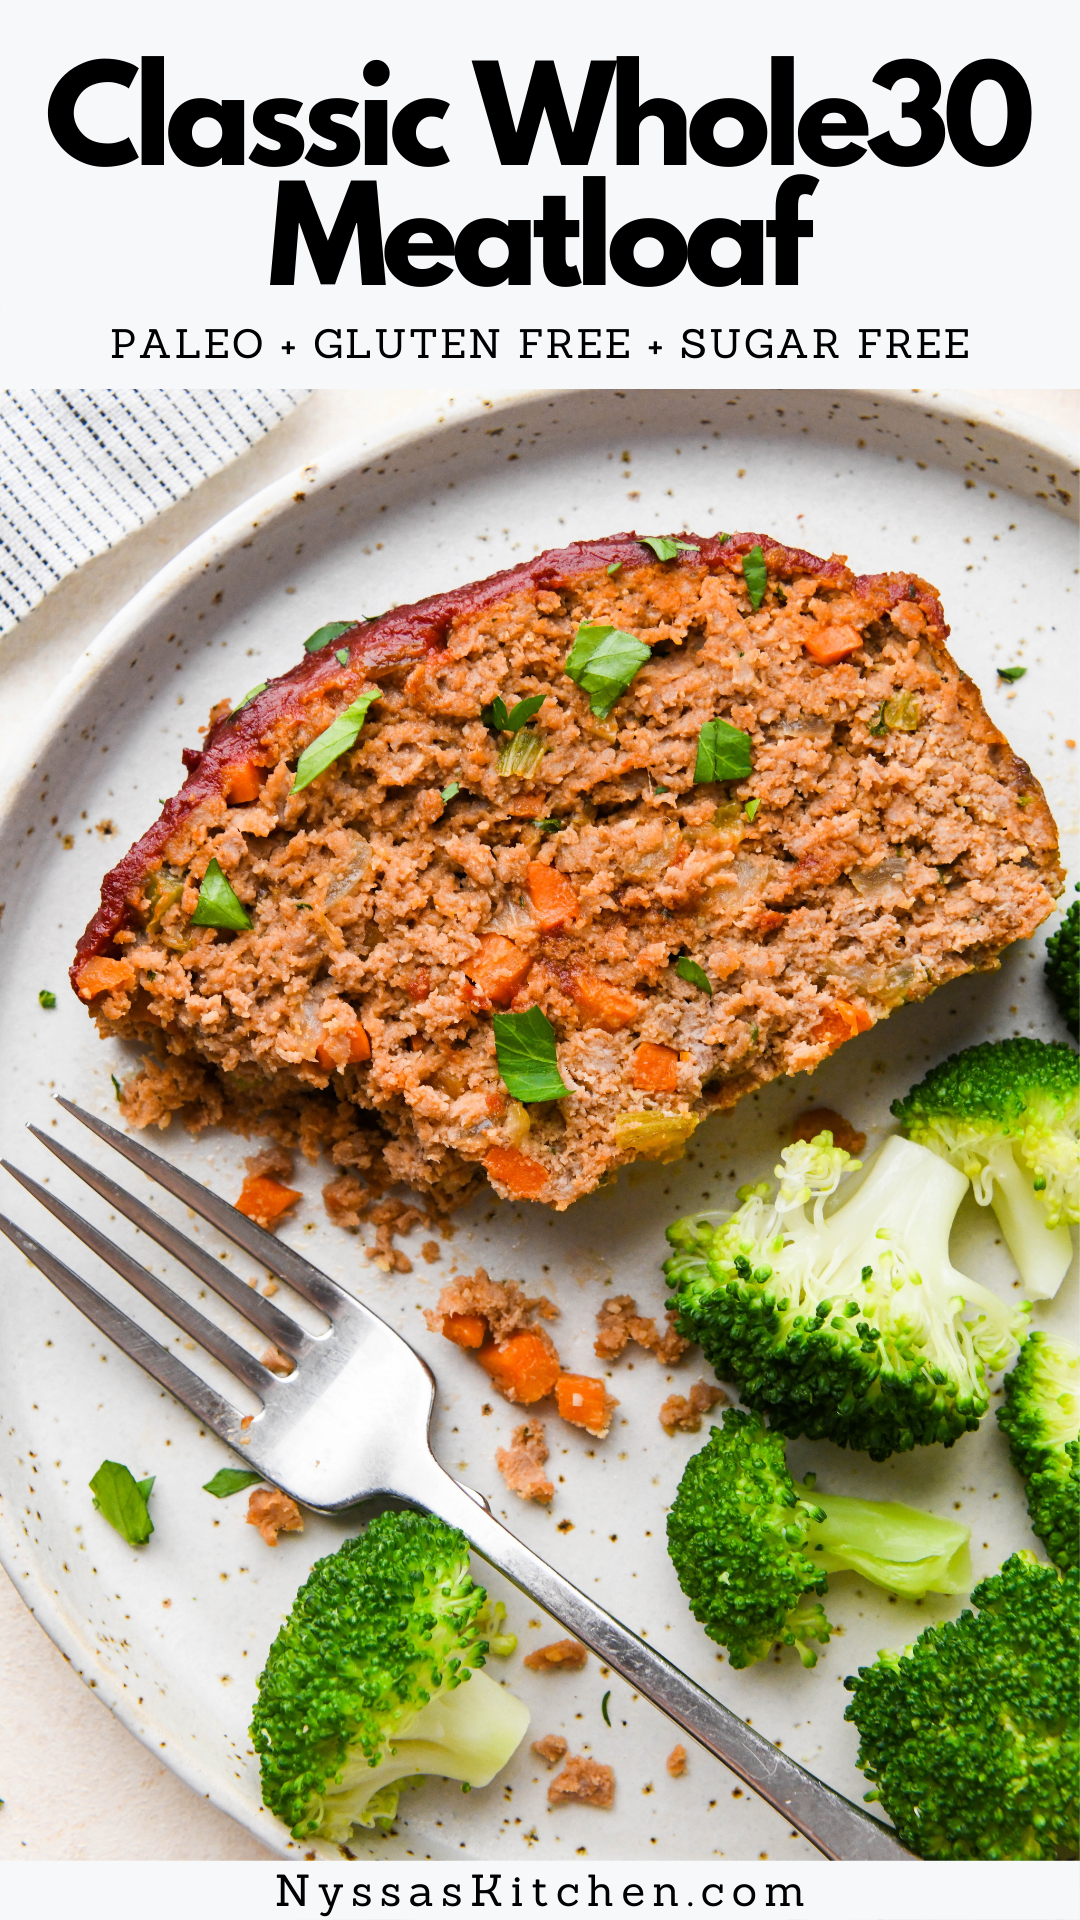 This classic Whole30 meatloaf is the ultimate healthy comfort food! Made with all the traditional meatloaf ingredients but without the dairy, gluten, and sugar. An easy recipe that makes delicious leftovers - kid friendly and perfect for the whole family! Whole30, paleo, gluten free, dairy free, grain free.